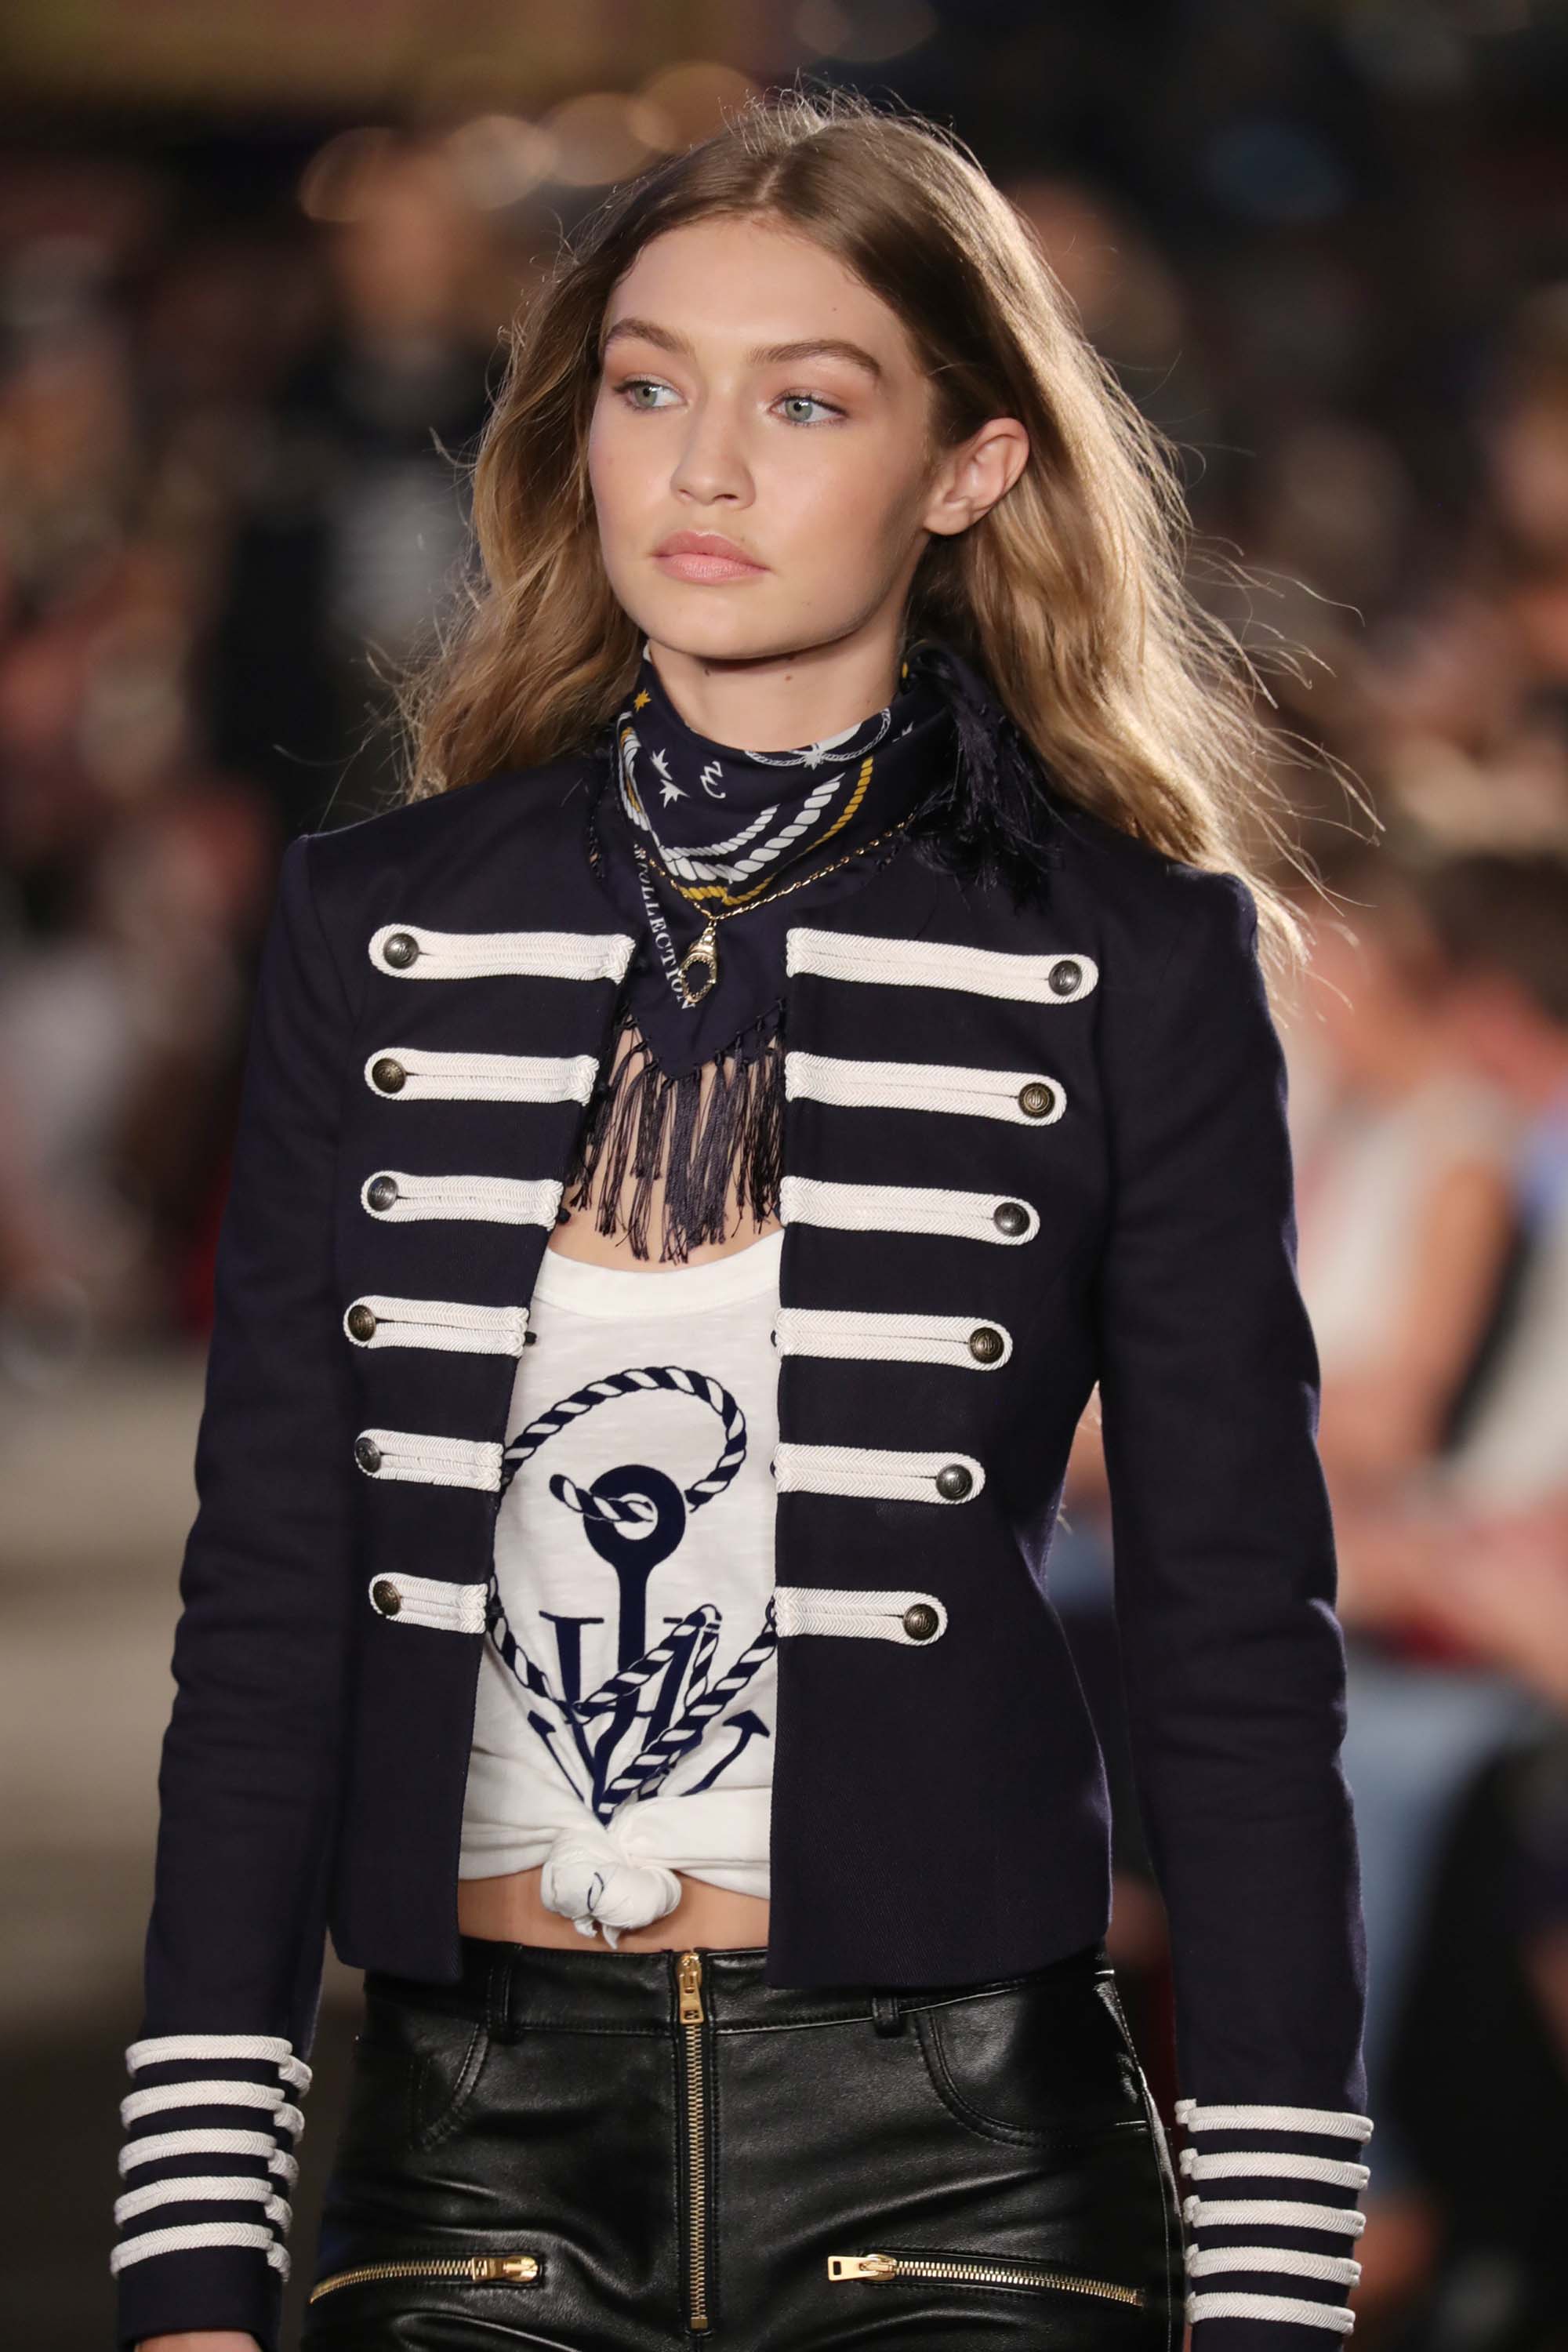 Gigi Hadid attends the #TOMMYNOW Women’s Fashion Show